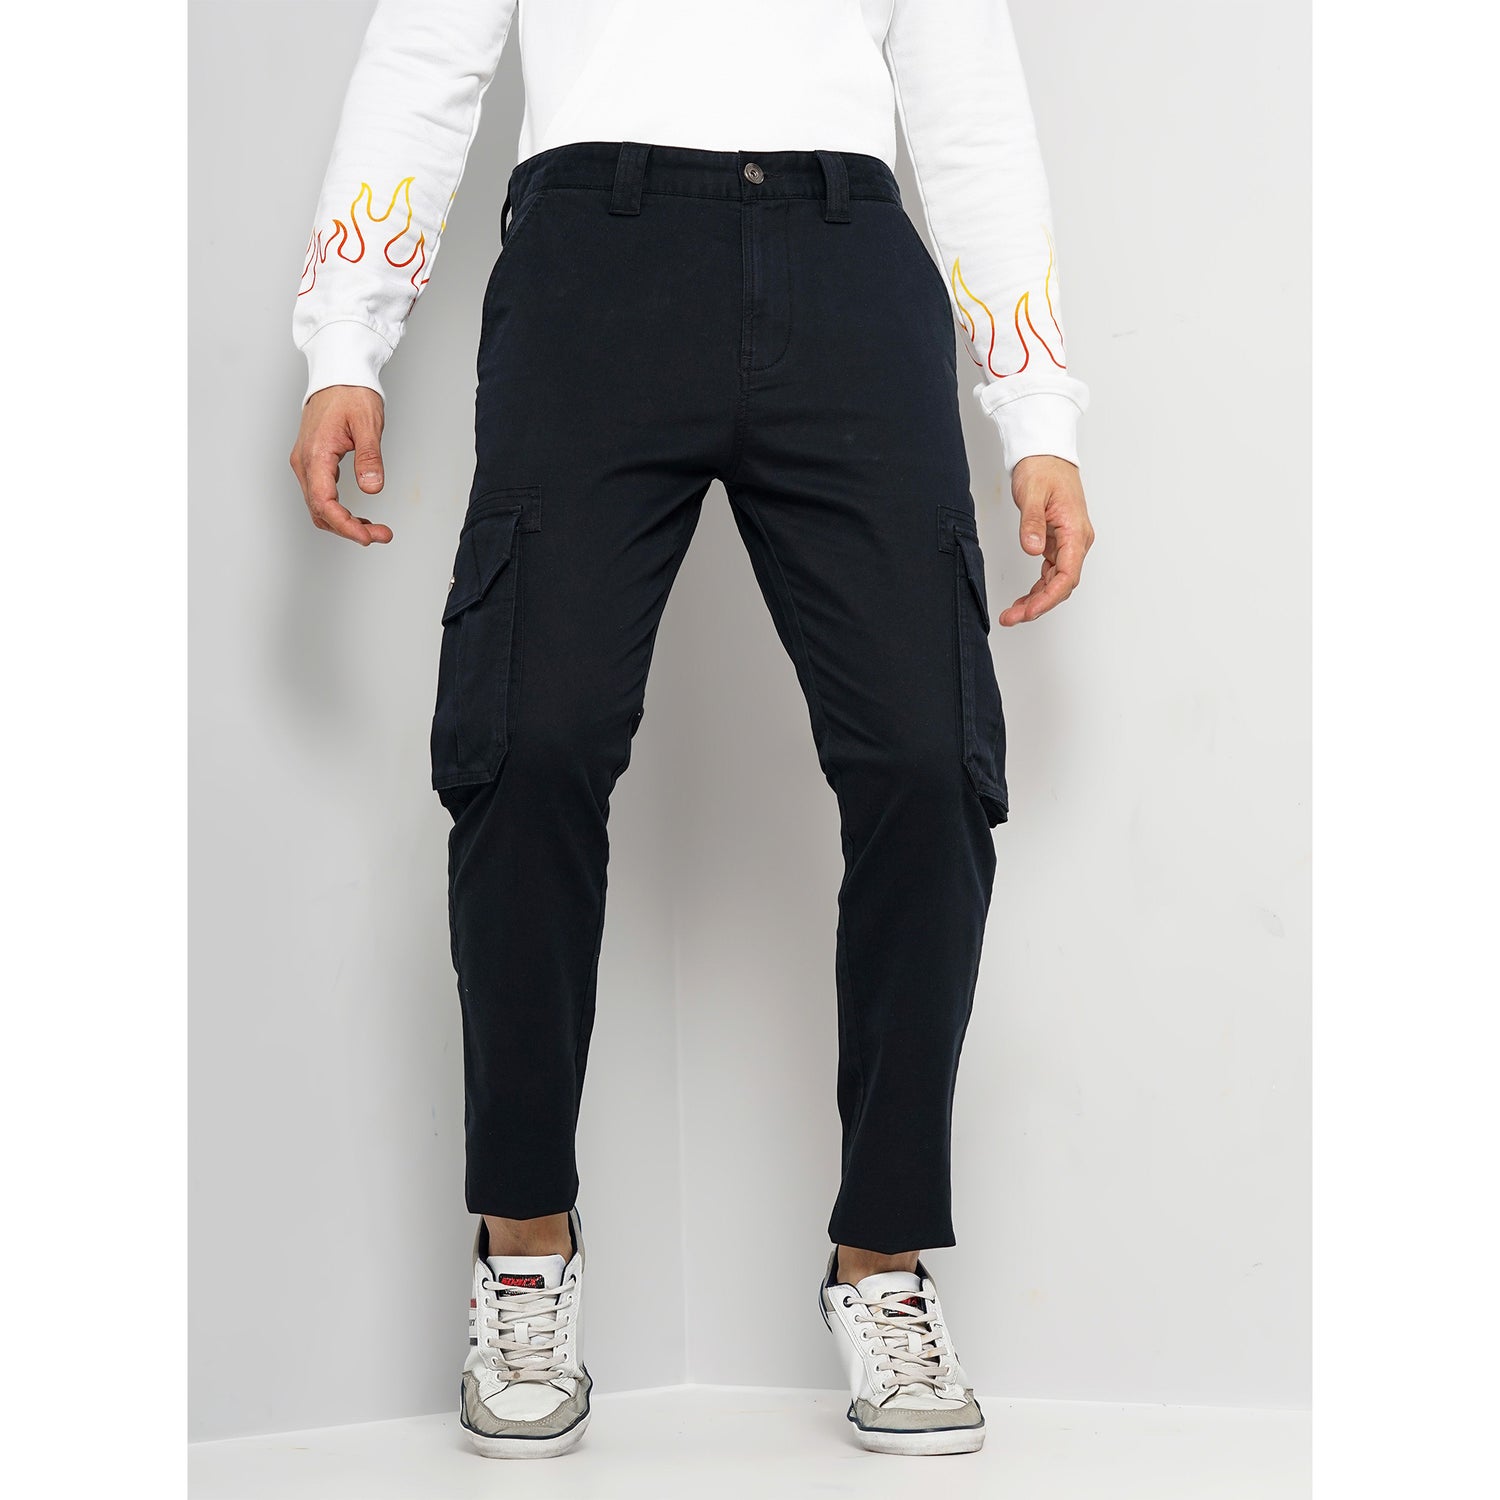 Solid Black Cotton-Blend Trousers (FOVENT)